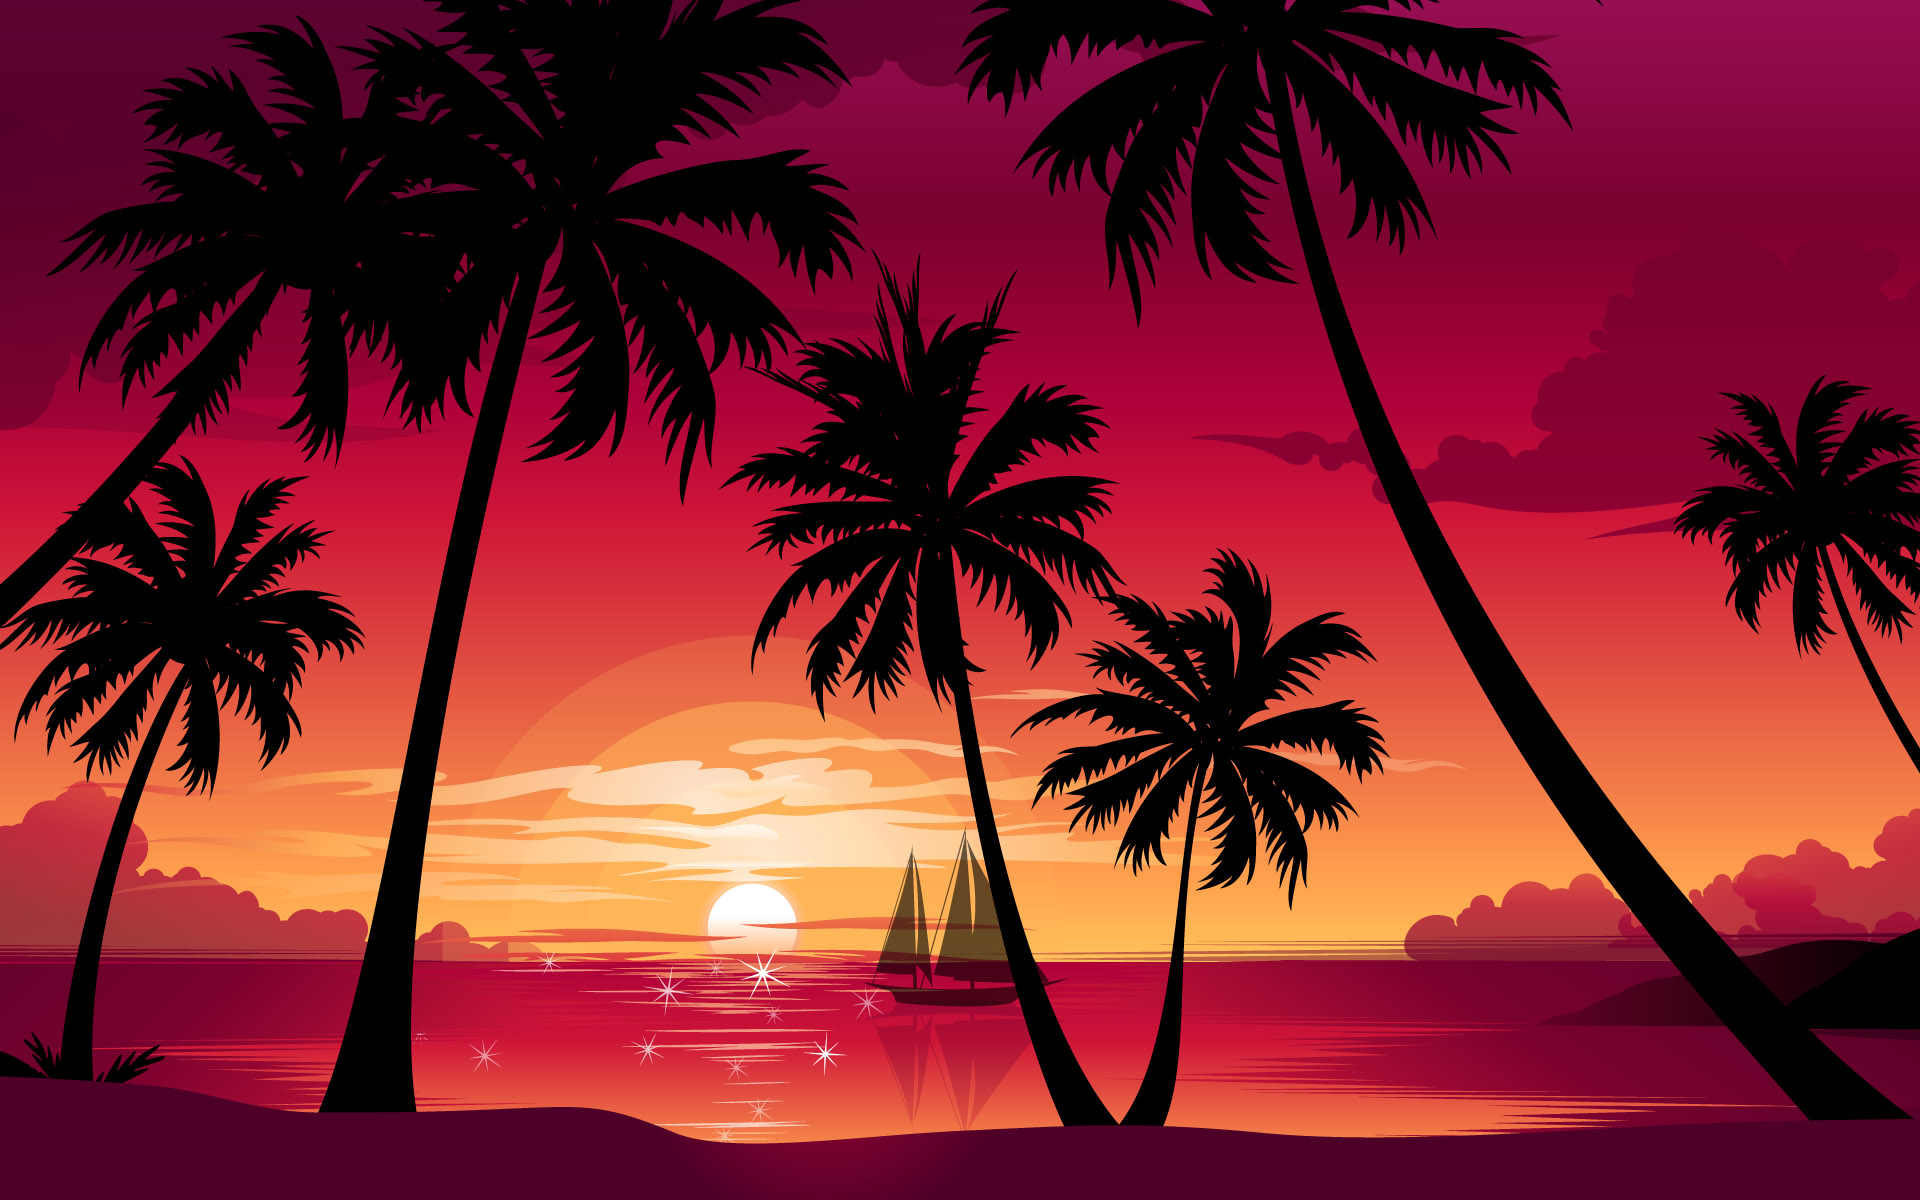 trees sunset hd wallpapers palm trees sunset wallpapers palm trees 1920x1200